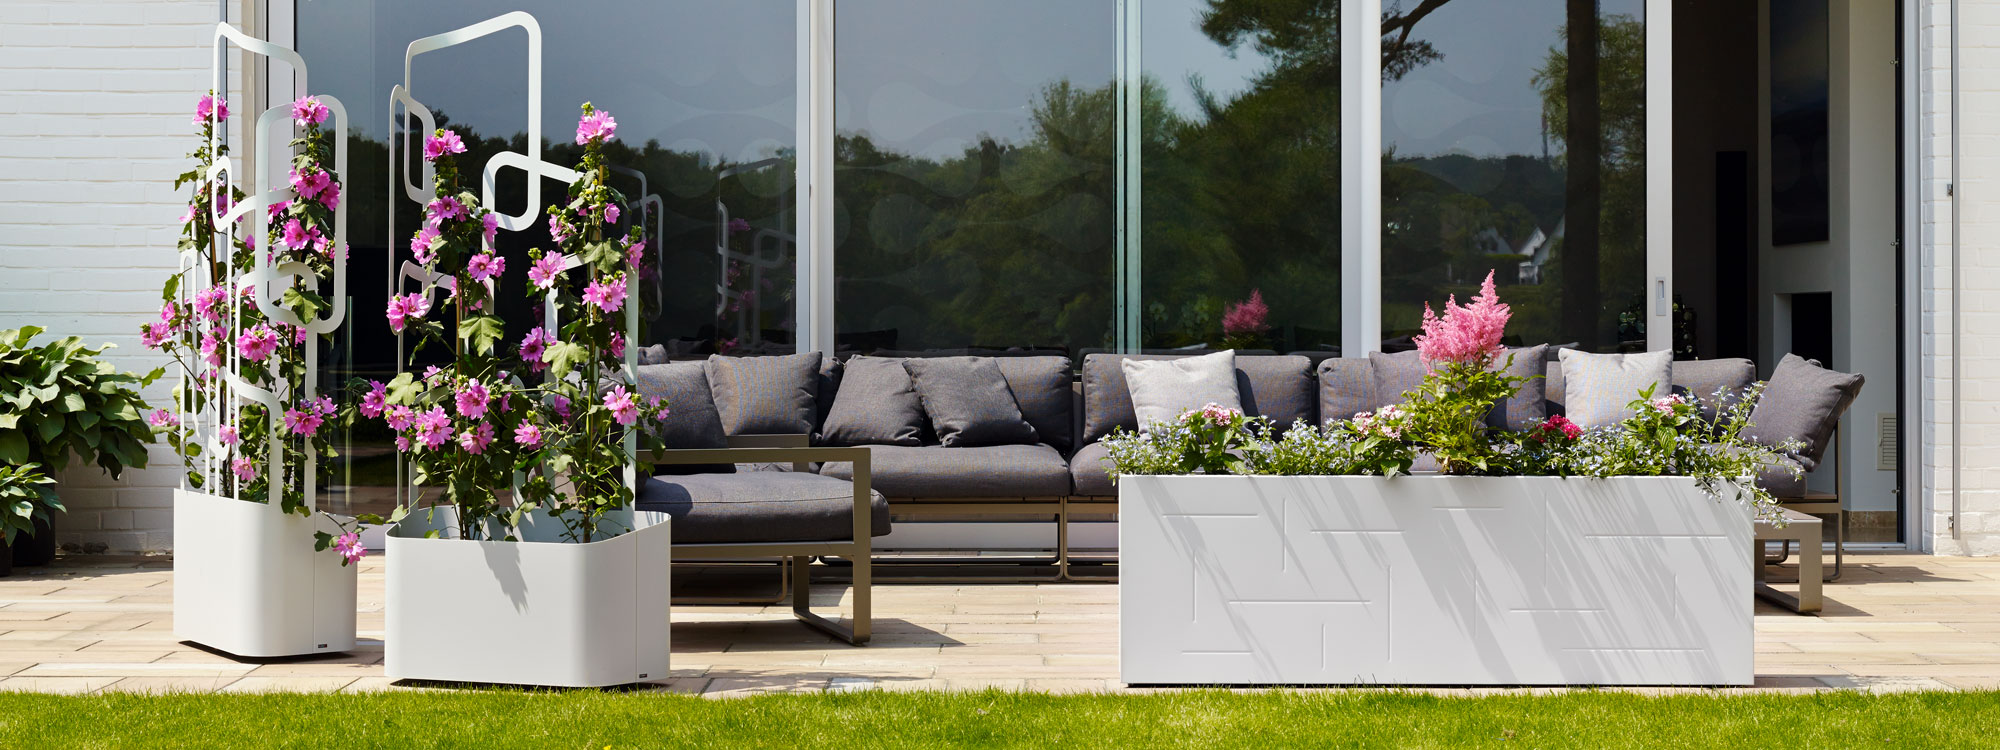 Image of pair of Flora Paro planters with wheels shown in sunny terrace next to a modern garden sofa